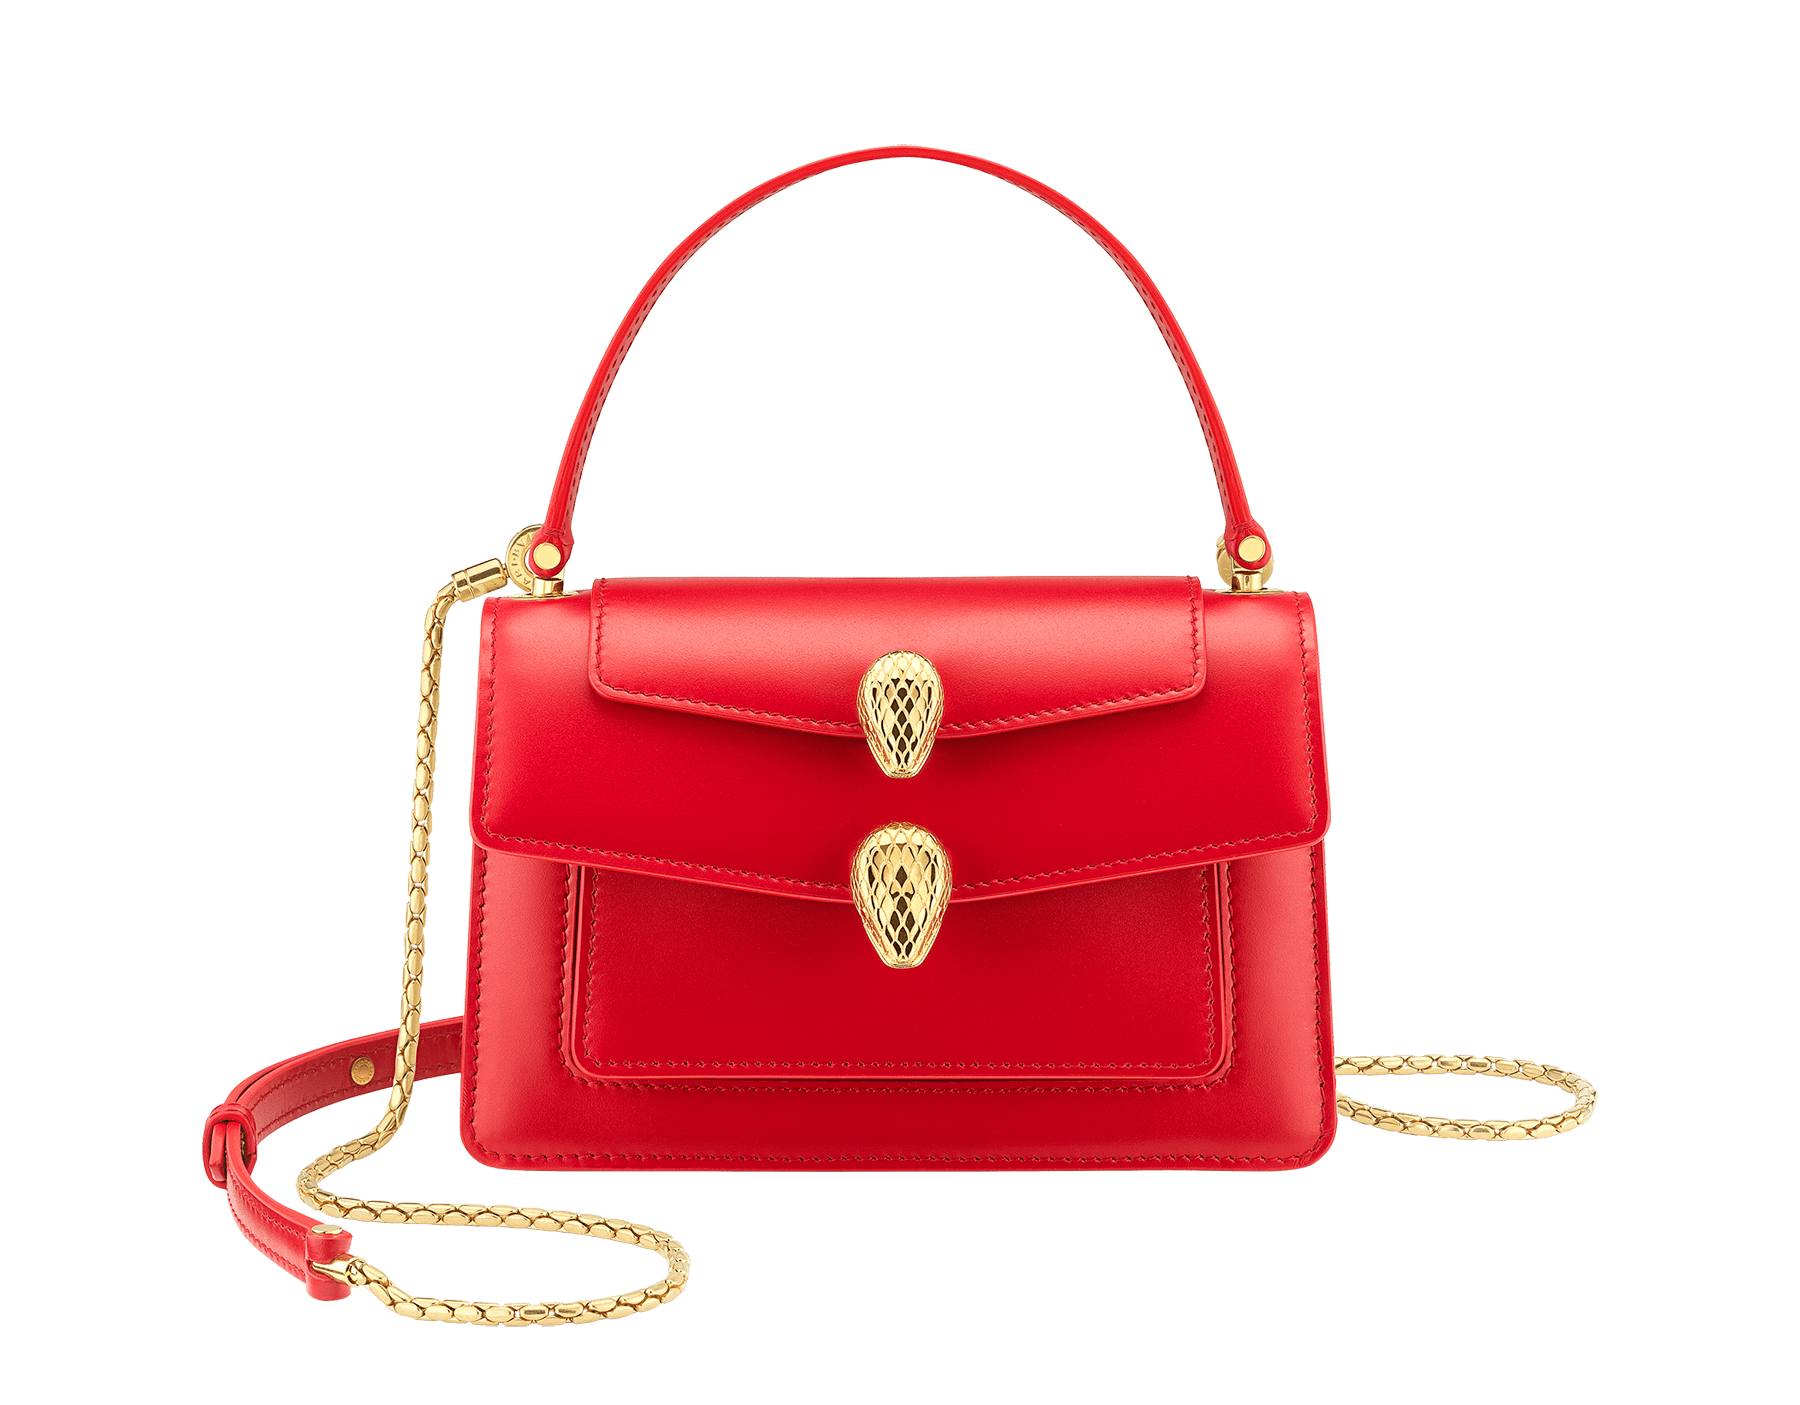 "Alexander Wang x Bvlgari" belt bag in smooth Amaranth Garnet red calfskin. New double Serpenti head closure in antique gold-plated brass with alluring red enamel eyes. SFW-001-1029Sb image 1